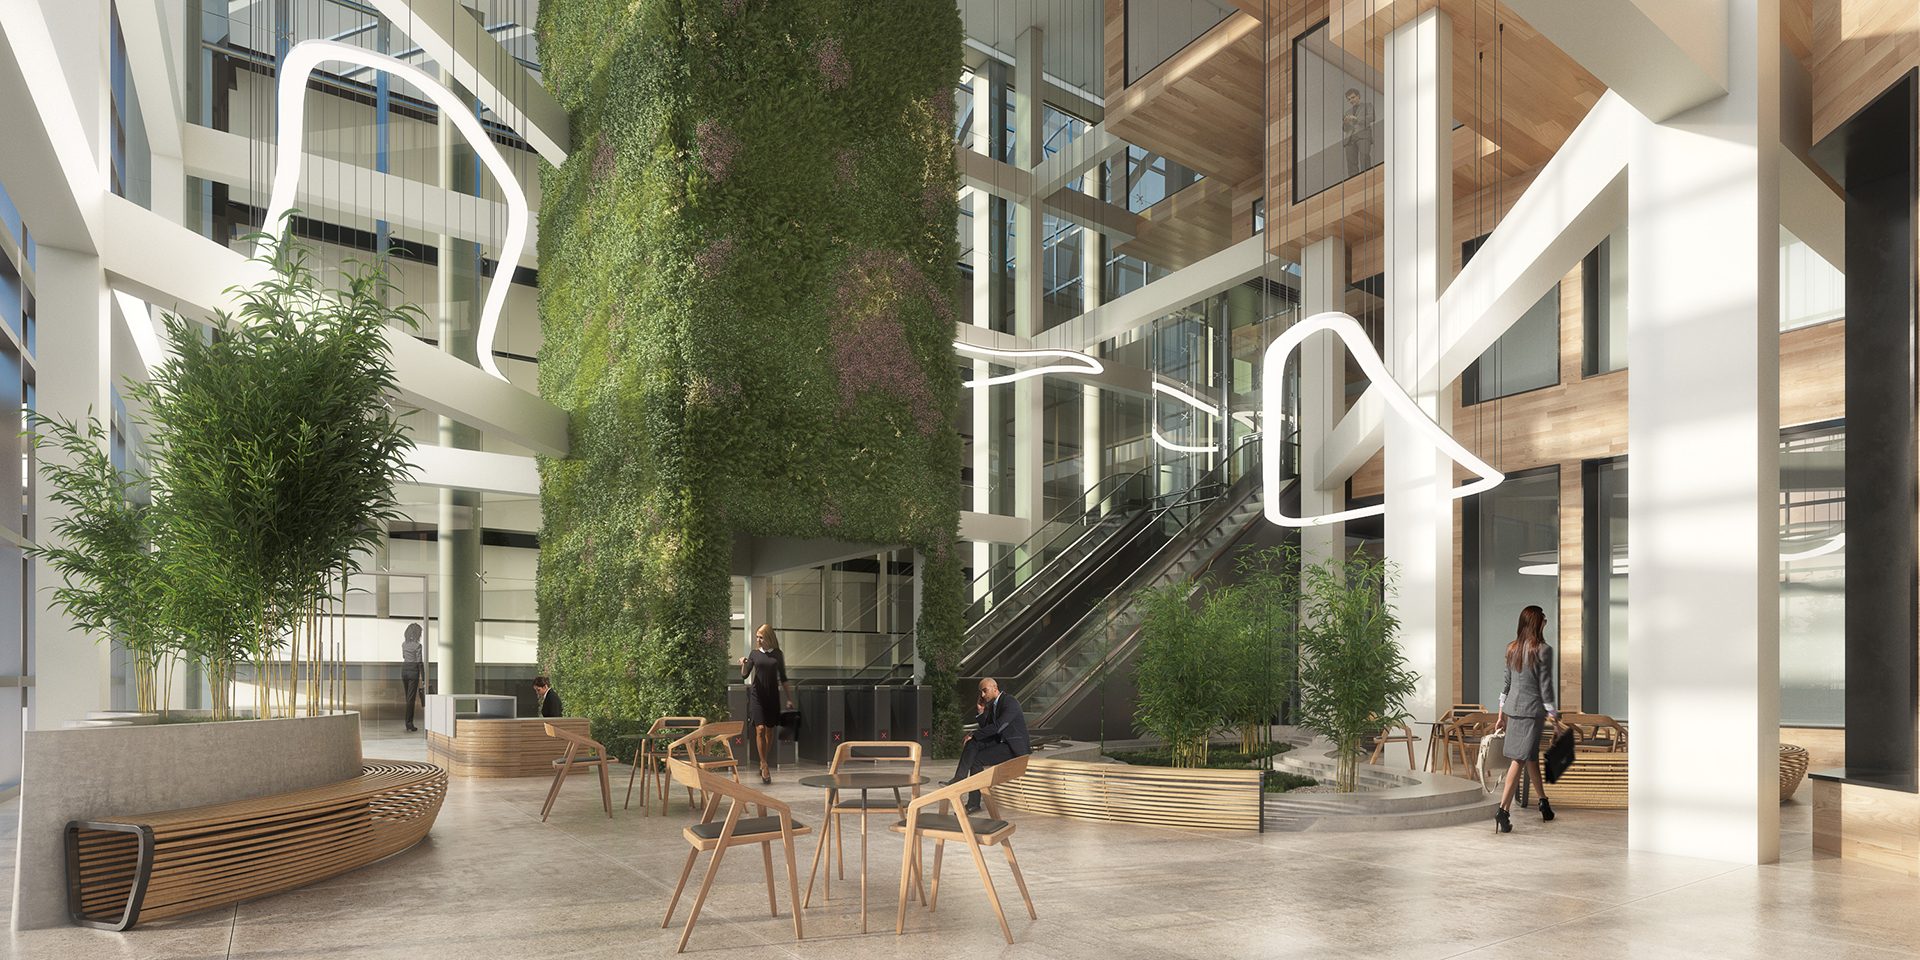 Organic building lobby design as part of the building renovation study of 4 Gateway Center